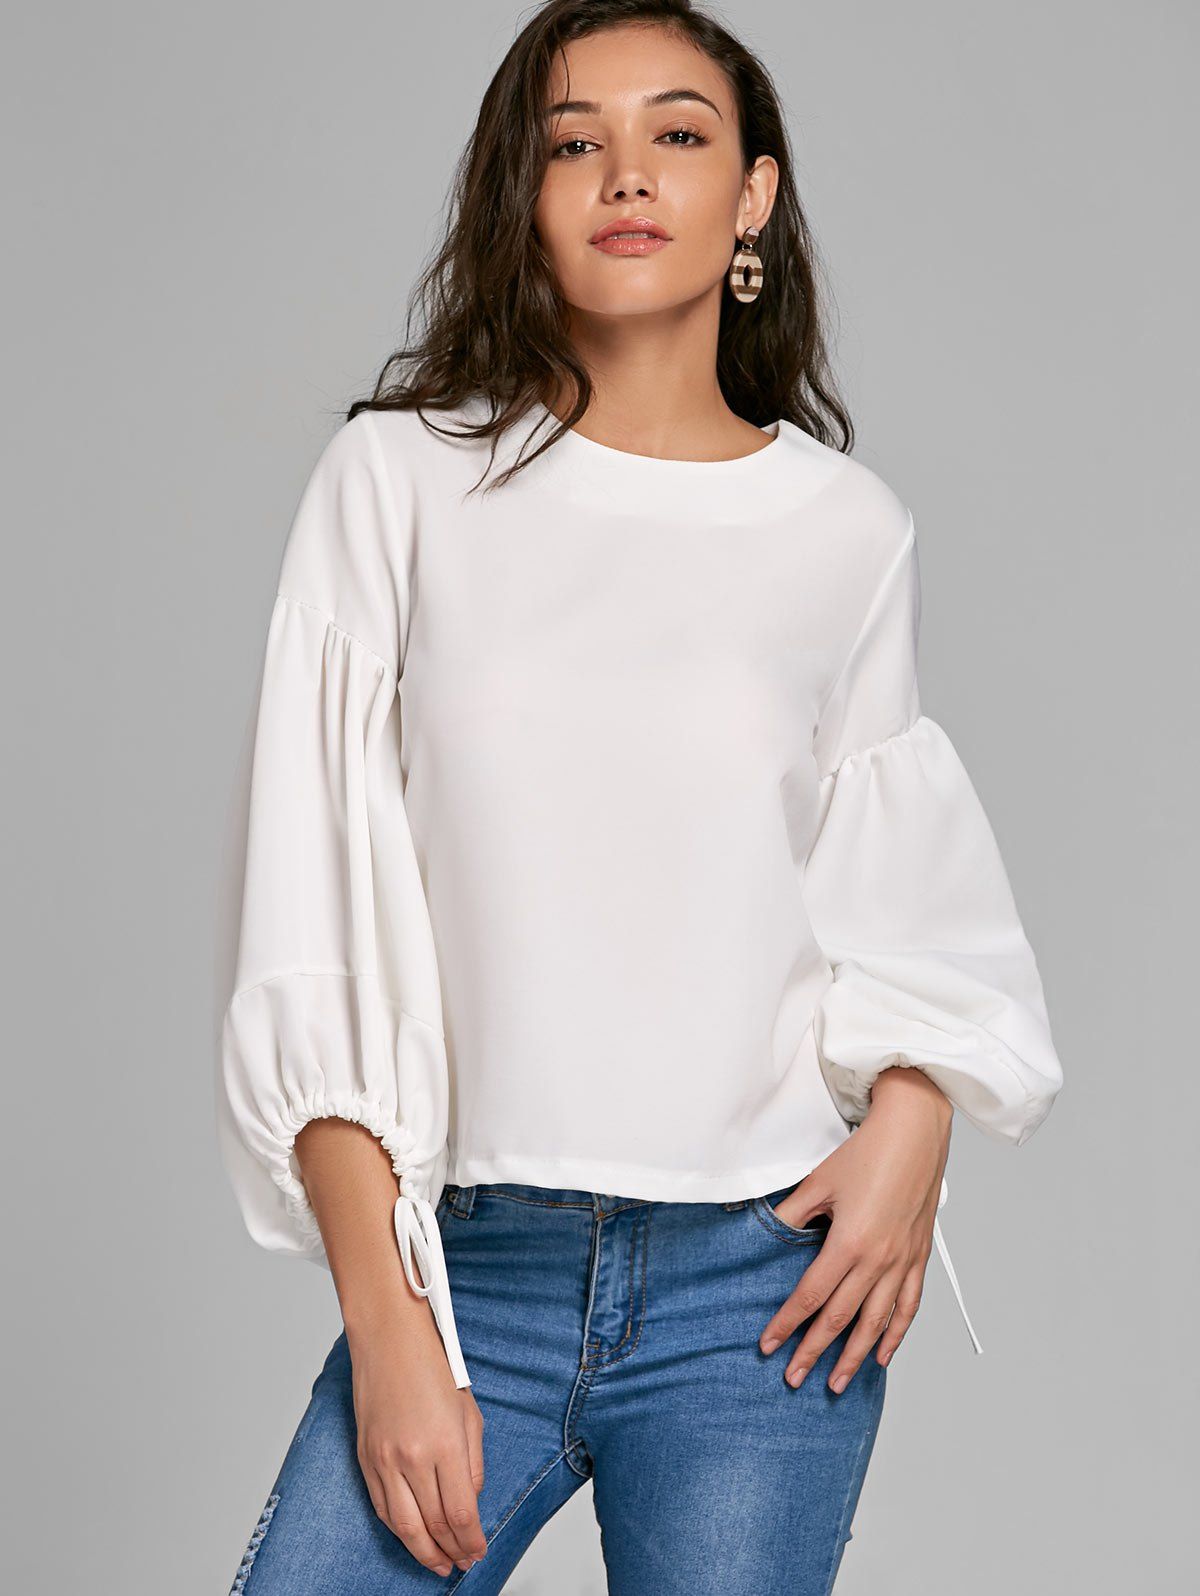 Dressy white long sleeve blouses with cuffs sleeves – Fashion catalogs